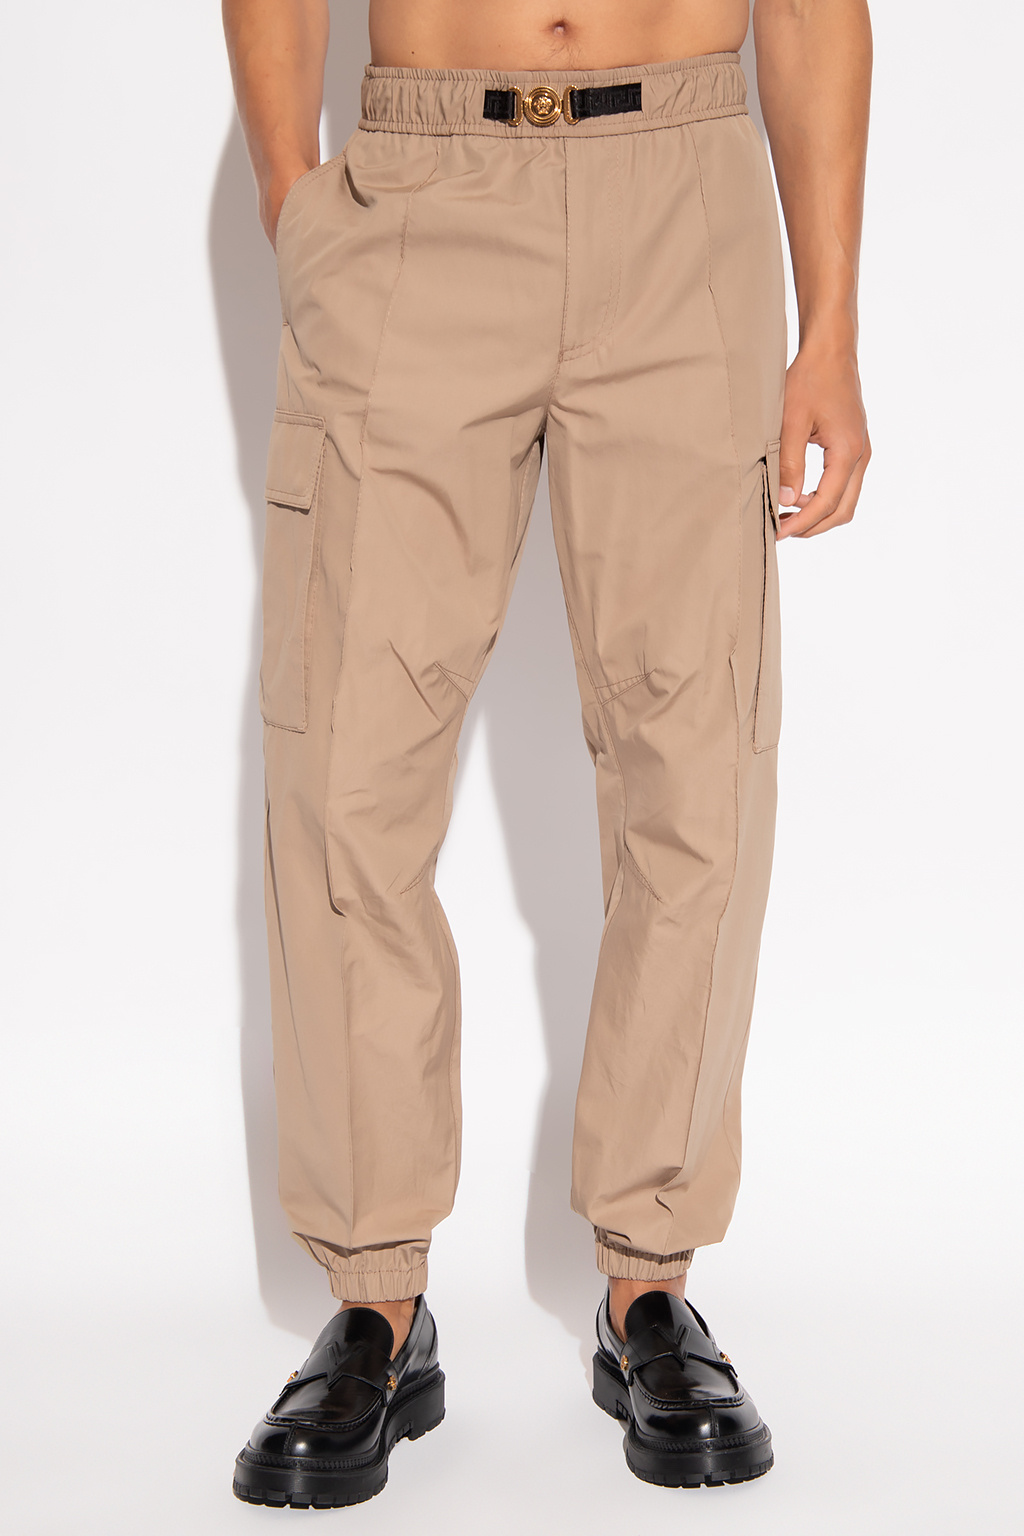 Talbot Runhof Cargo Pants blue casual look Fashion Trousers Cargo Pants 